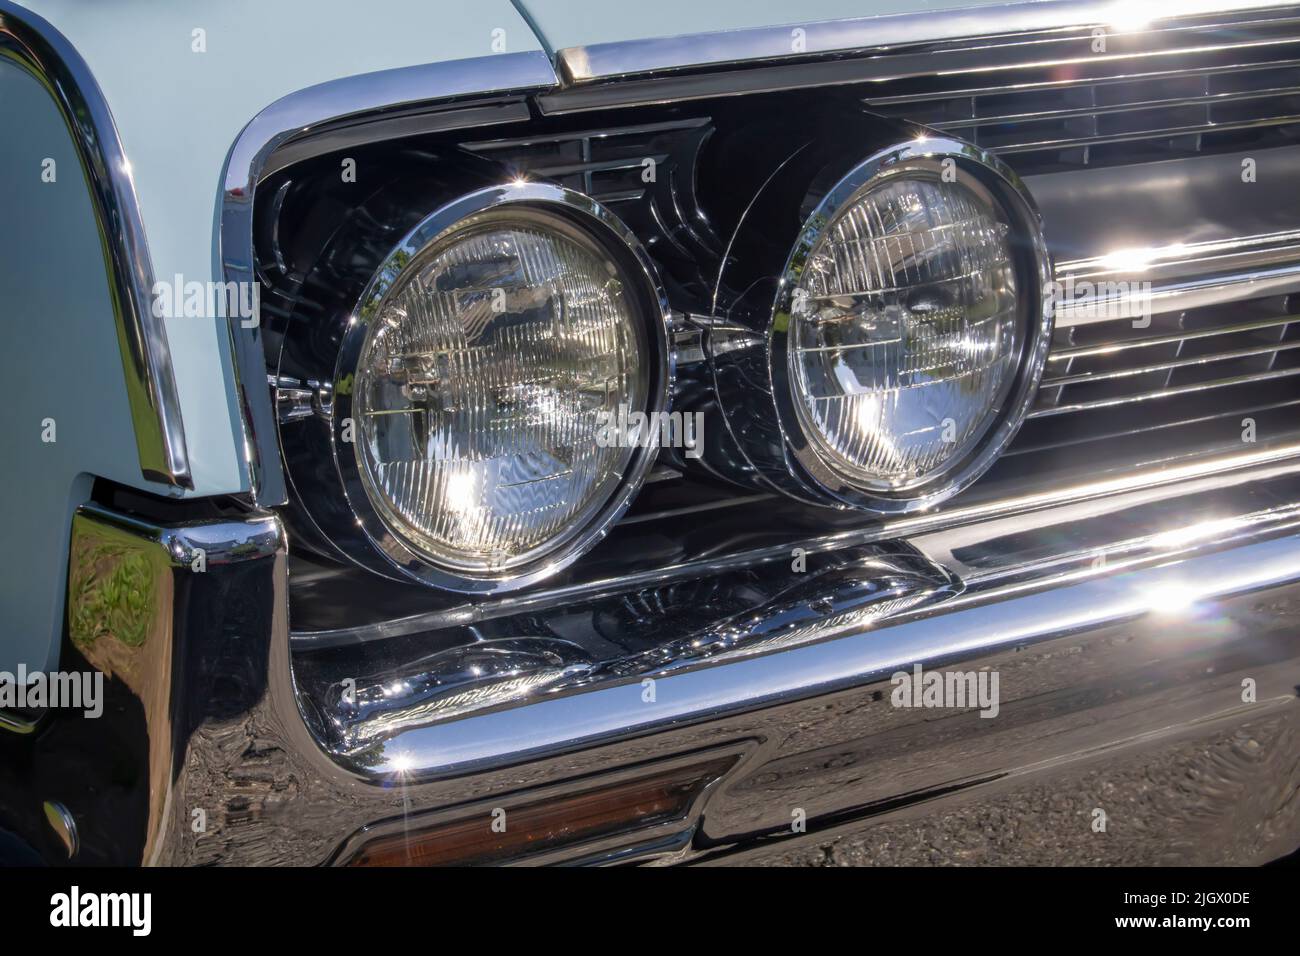 close up of classic vintage aesthetic car front lights, grille, chrome bumper Stock Photo